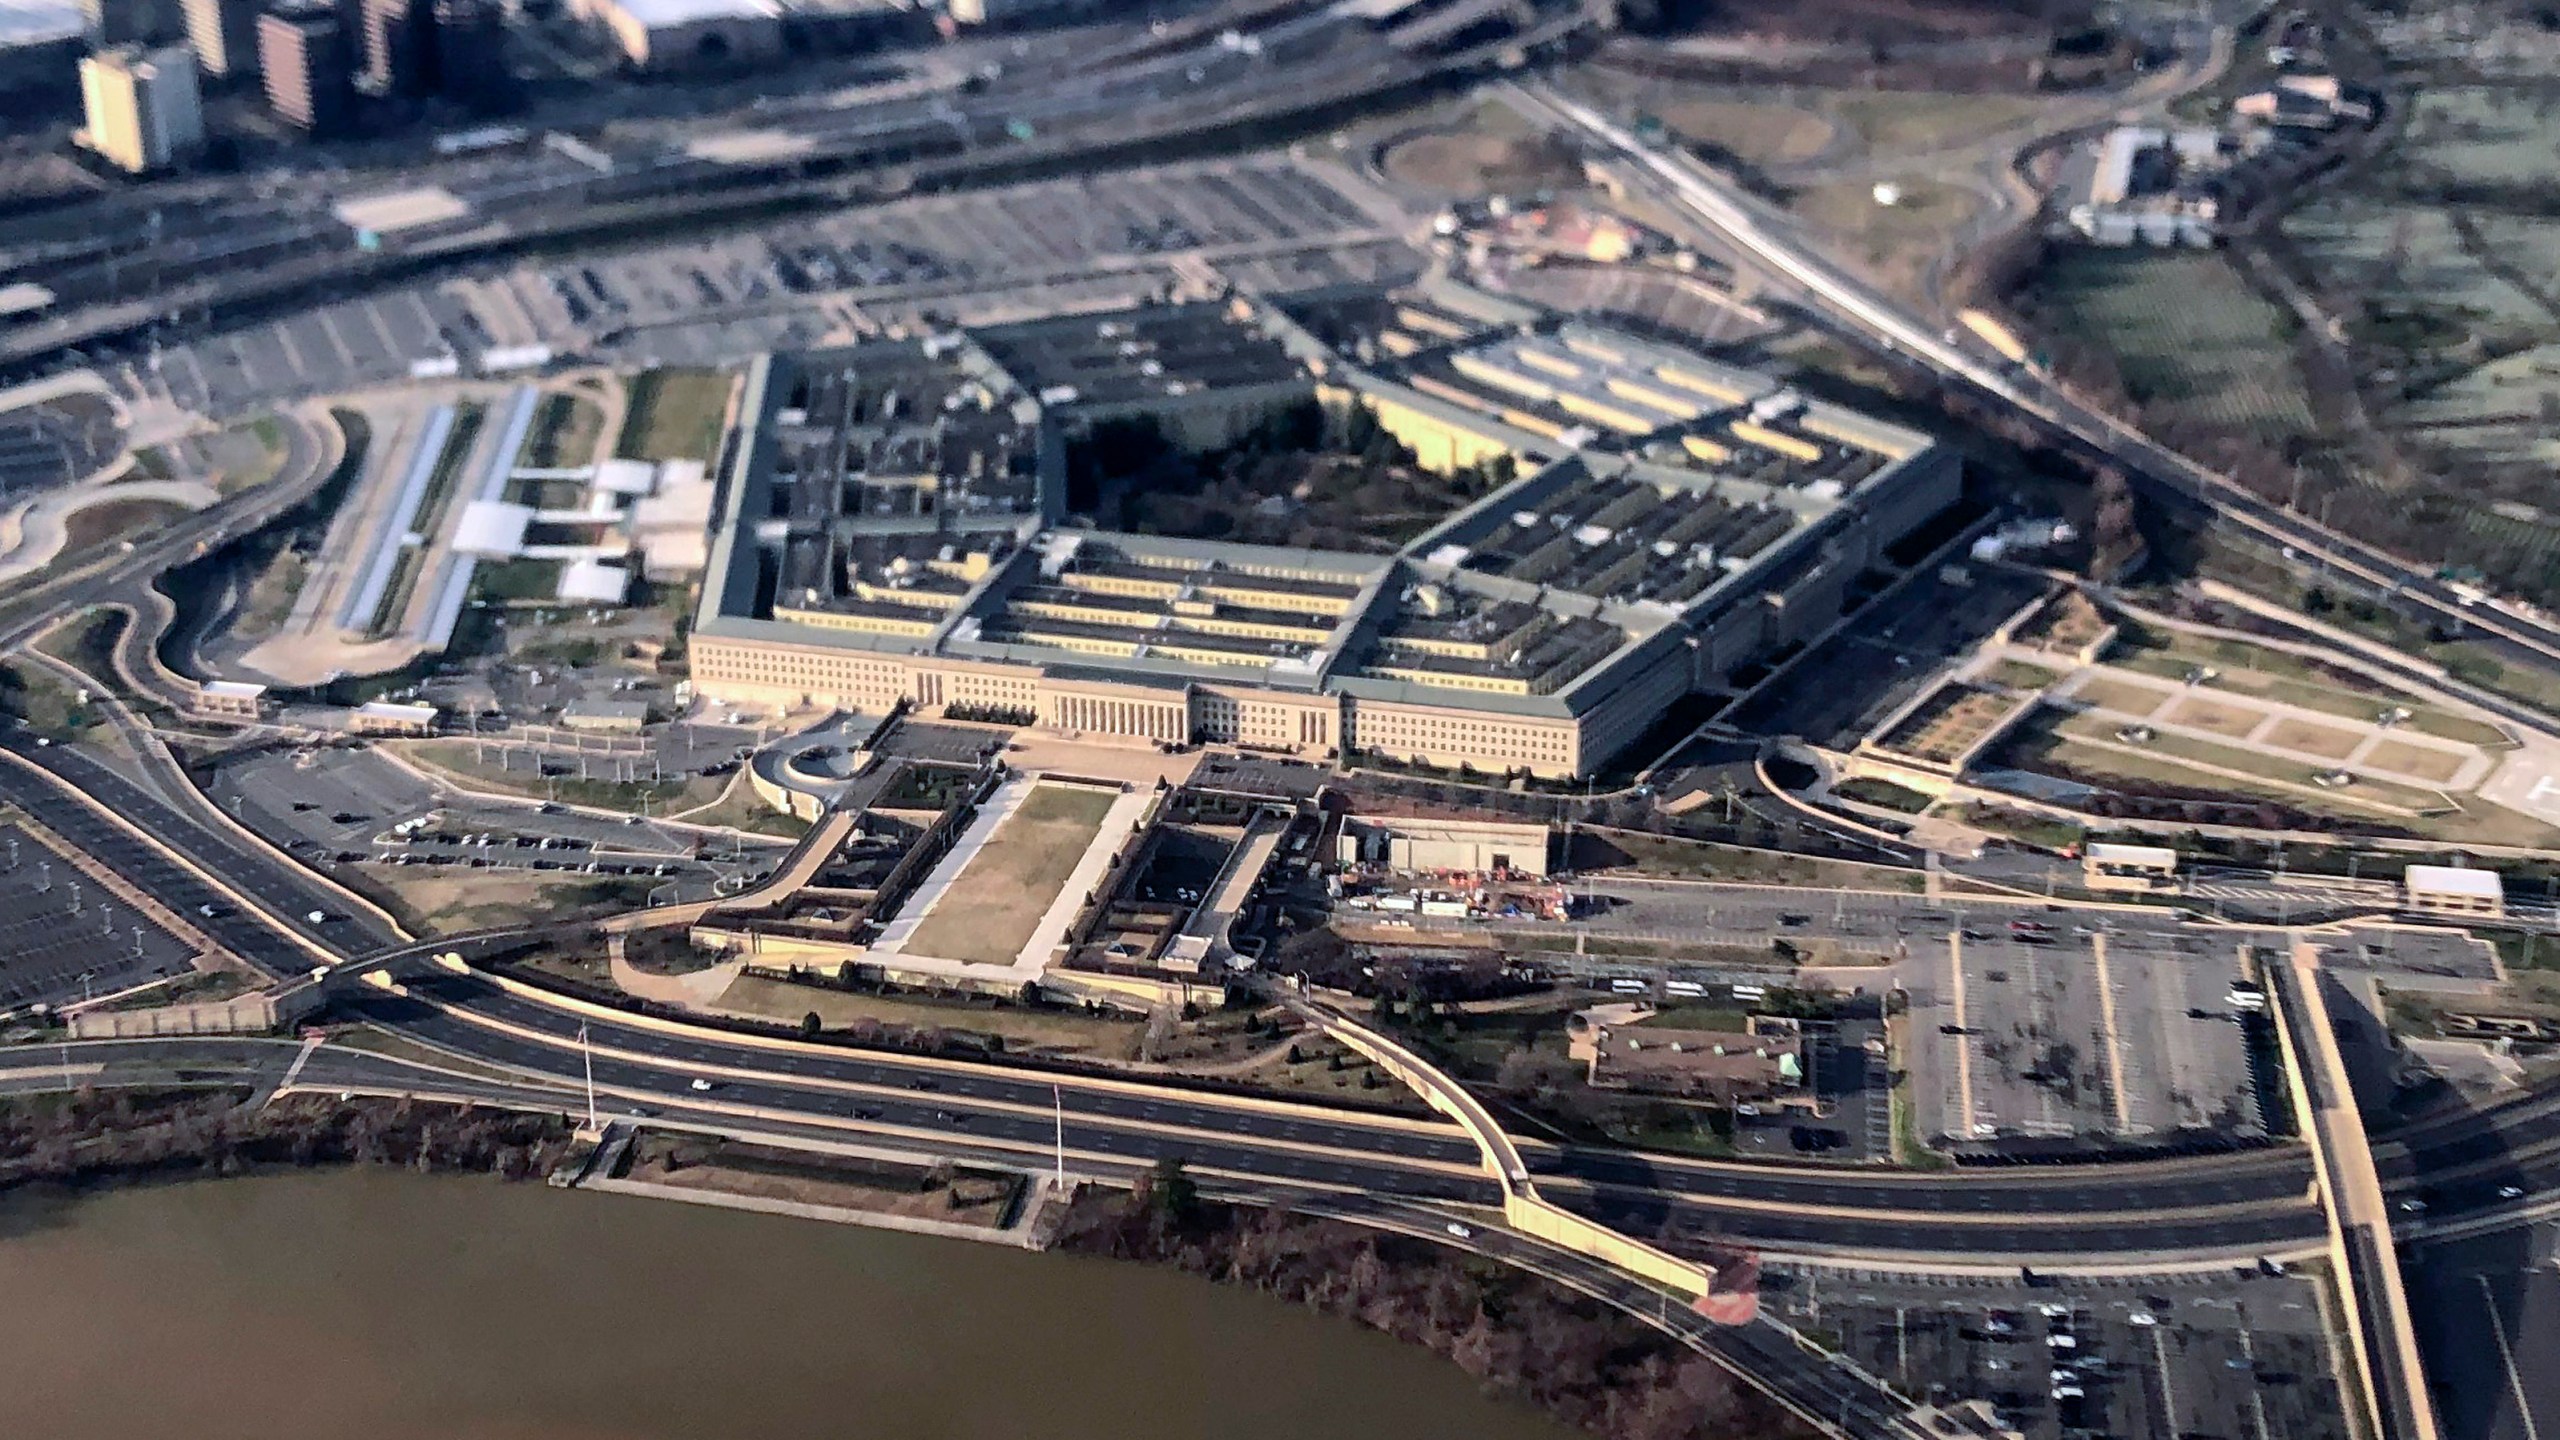 FILE - The Pentagon is seen in this aerial view made through an airplane window in Washington, Jan. 26, 2020. The Defense Department found $300 million for weapons for Ukraine in March 2024, even though the bill to fund the military aid is stalled in Congress. (AP Photo/Pablo Martinez Monsivais, File)